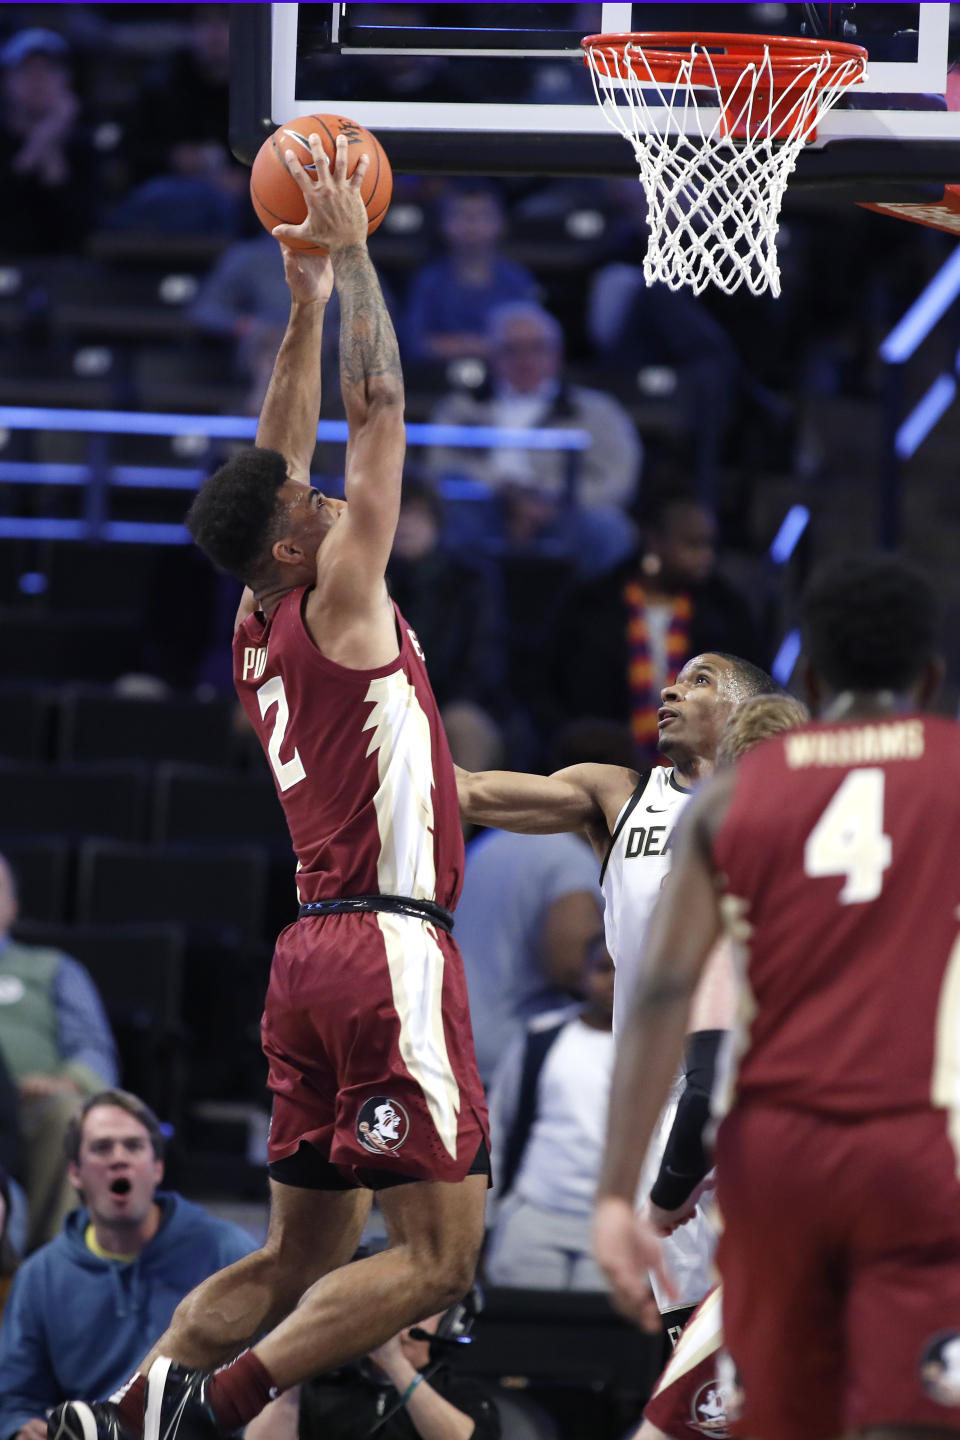 Florida State Anthony Polite (2) dunks in the first half against Wake Forest during an NCAA college basketball game Wednesday, Jan. 8, 2020 in Winston-Salem, N.C. (AP Photo/Lynn Hey)